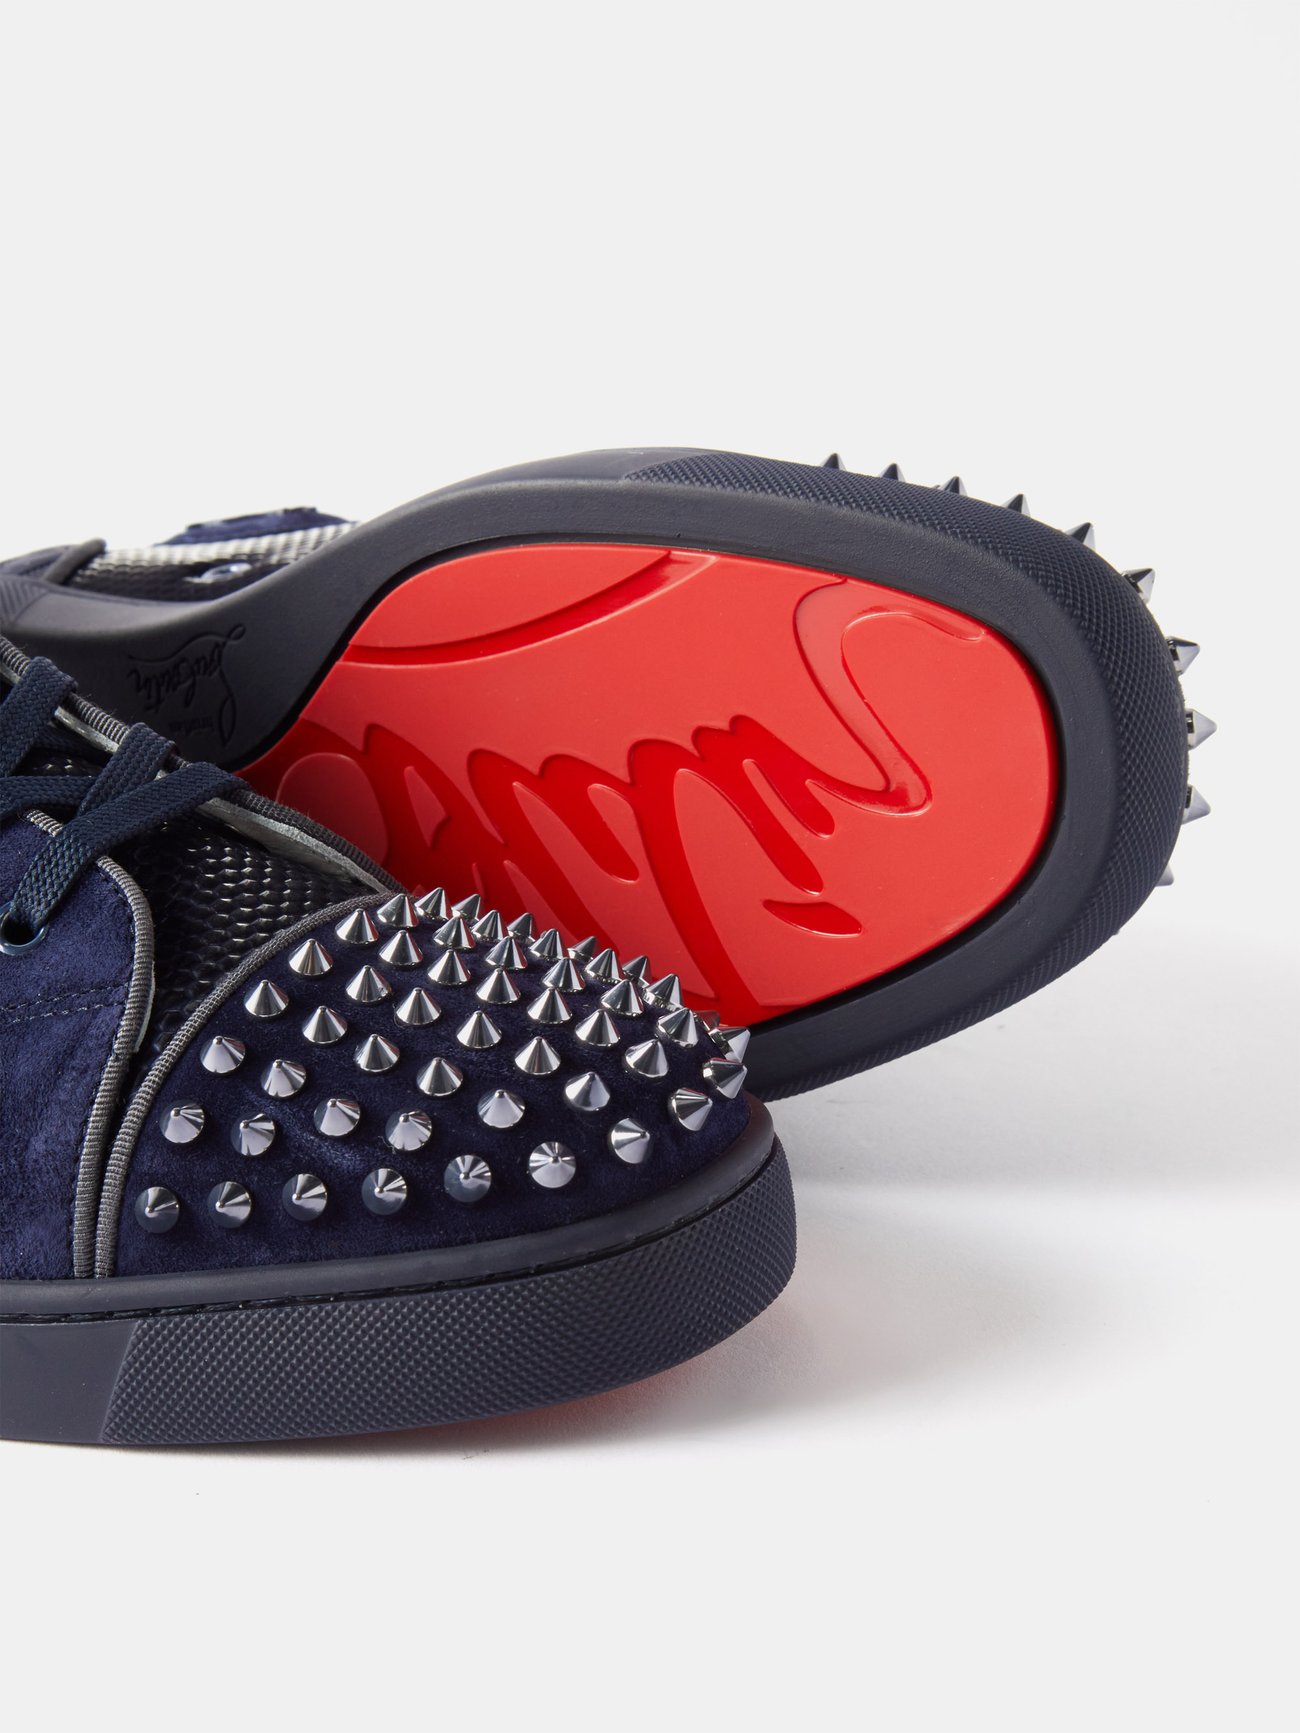 High trainers Christian Louboutin Blue size 11 US in Suede - 27474363